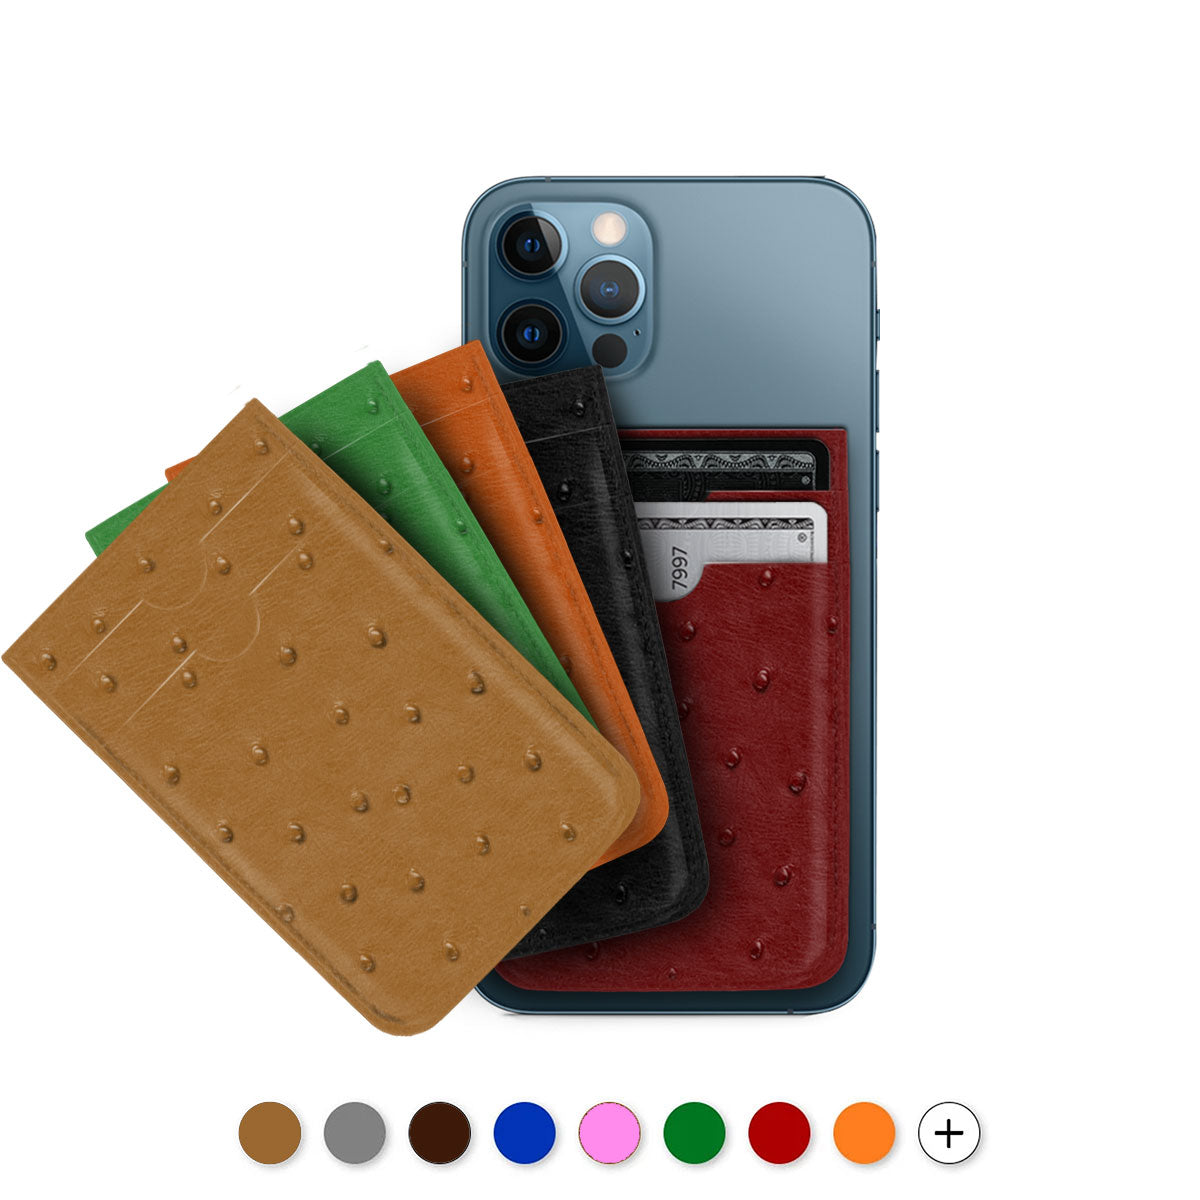 Wallet / credit card case with Magsafe for iPhone 14 and 13 (Pro, Pro Max) - Ostrich leather